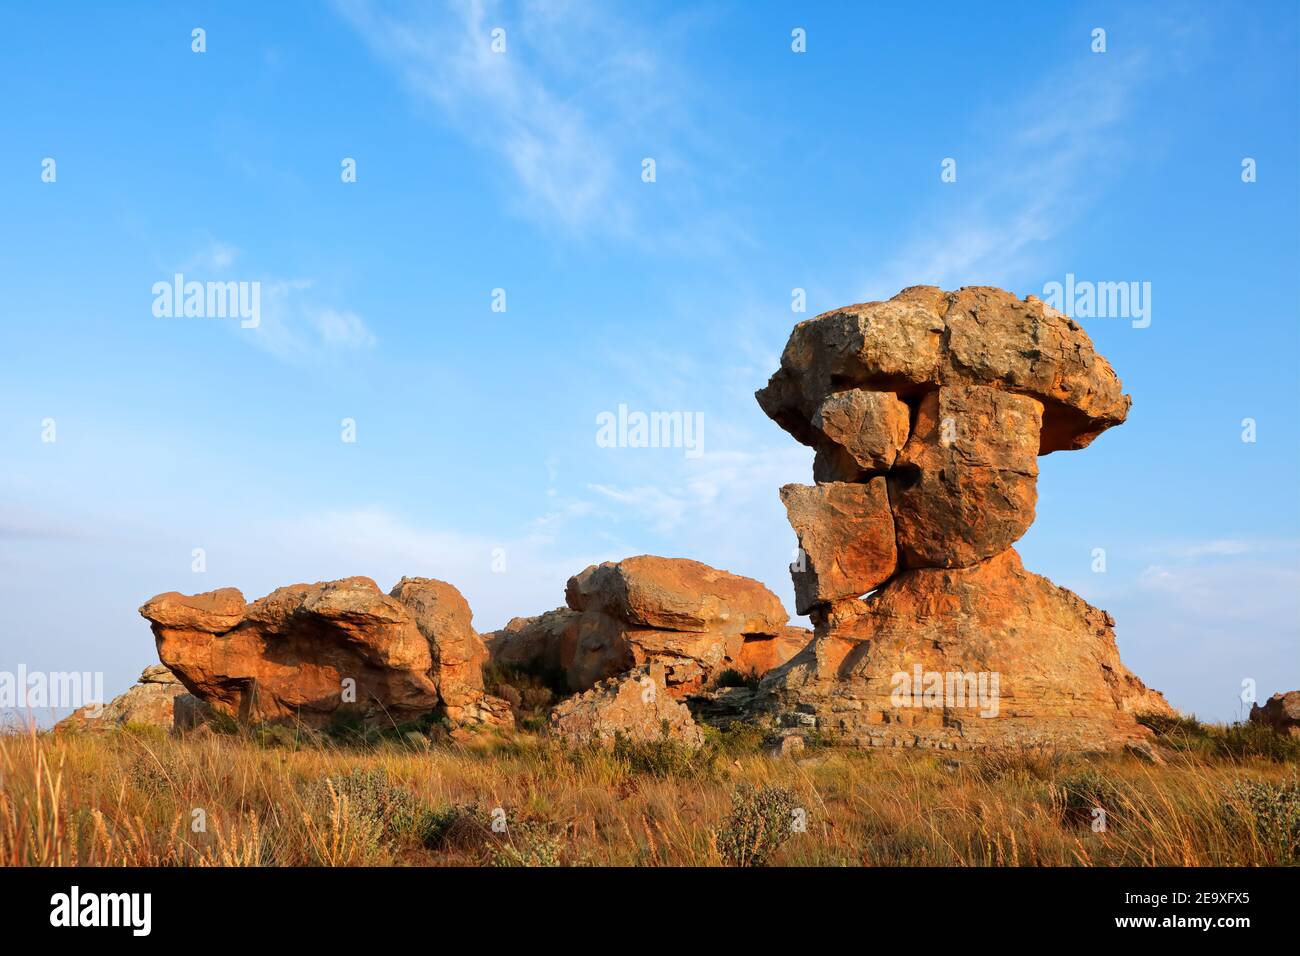 Sandstone rock formation against a blue sky and clouds, South Africa Stock Photo